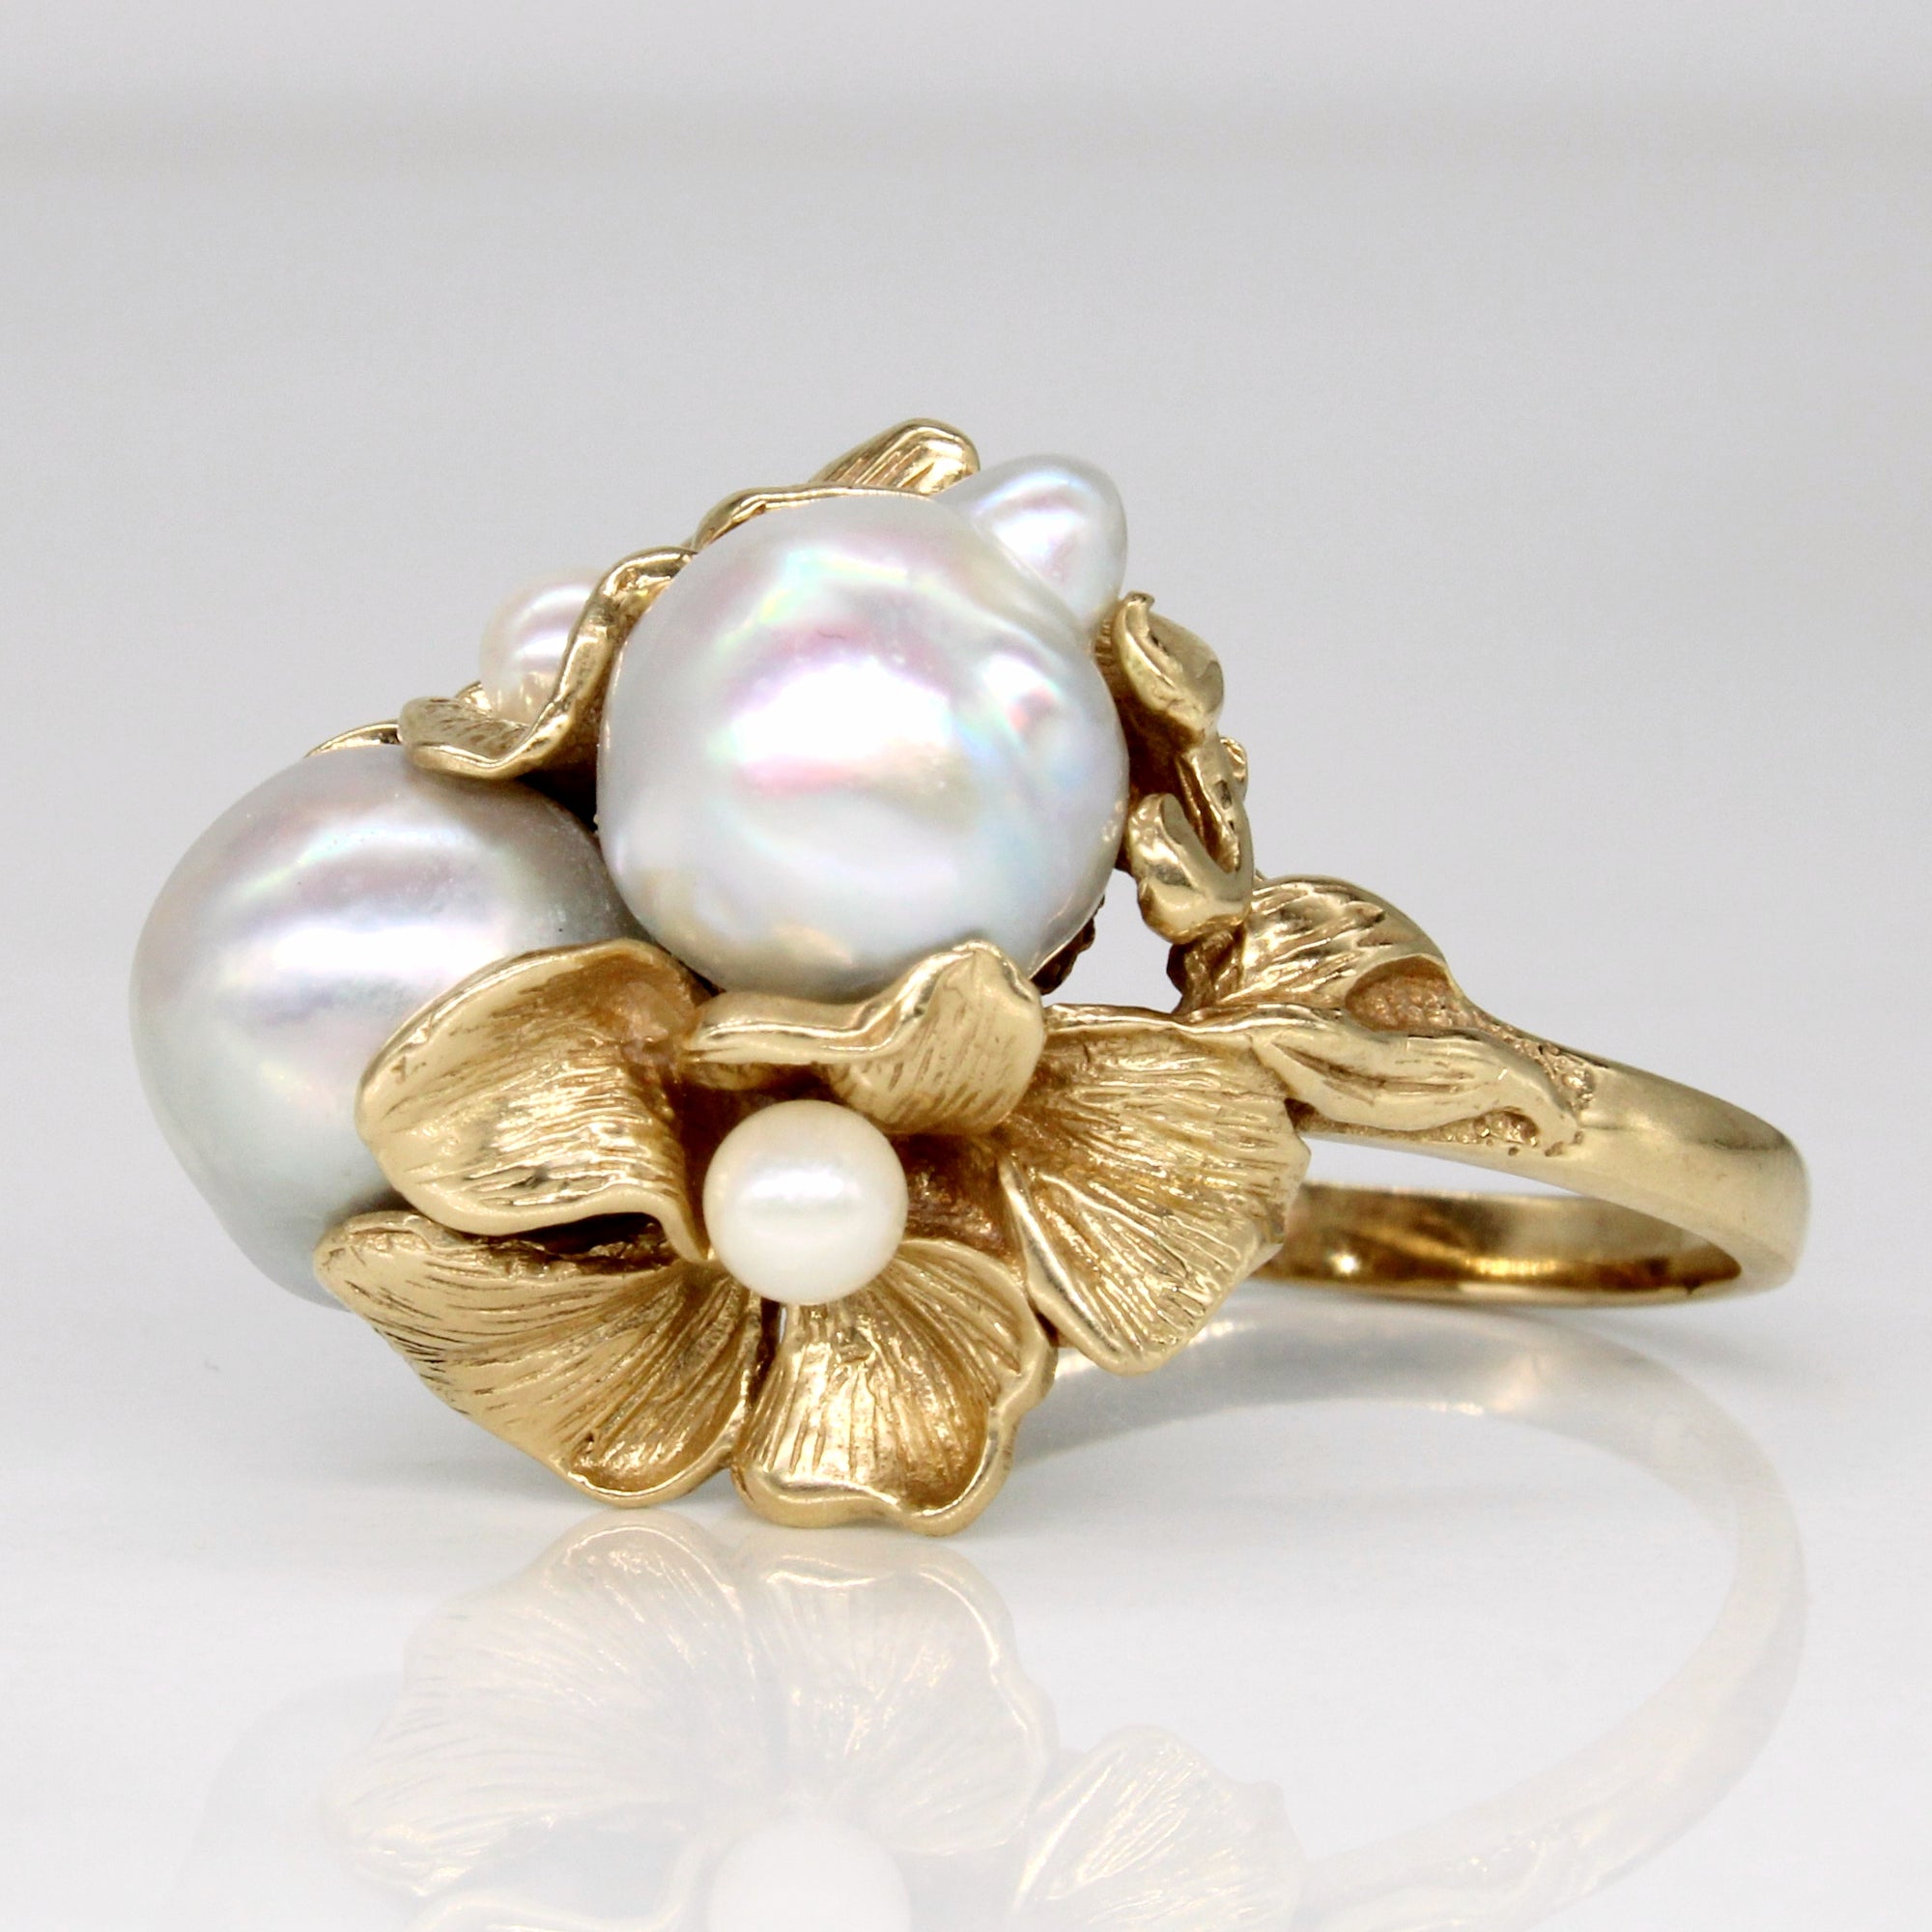 Baroque Pearl Cocktail Ring | SZ 8.75 |